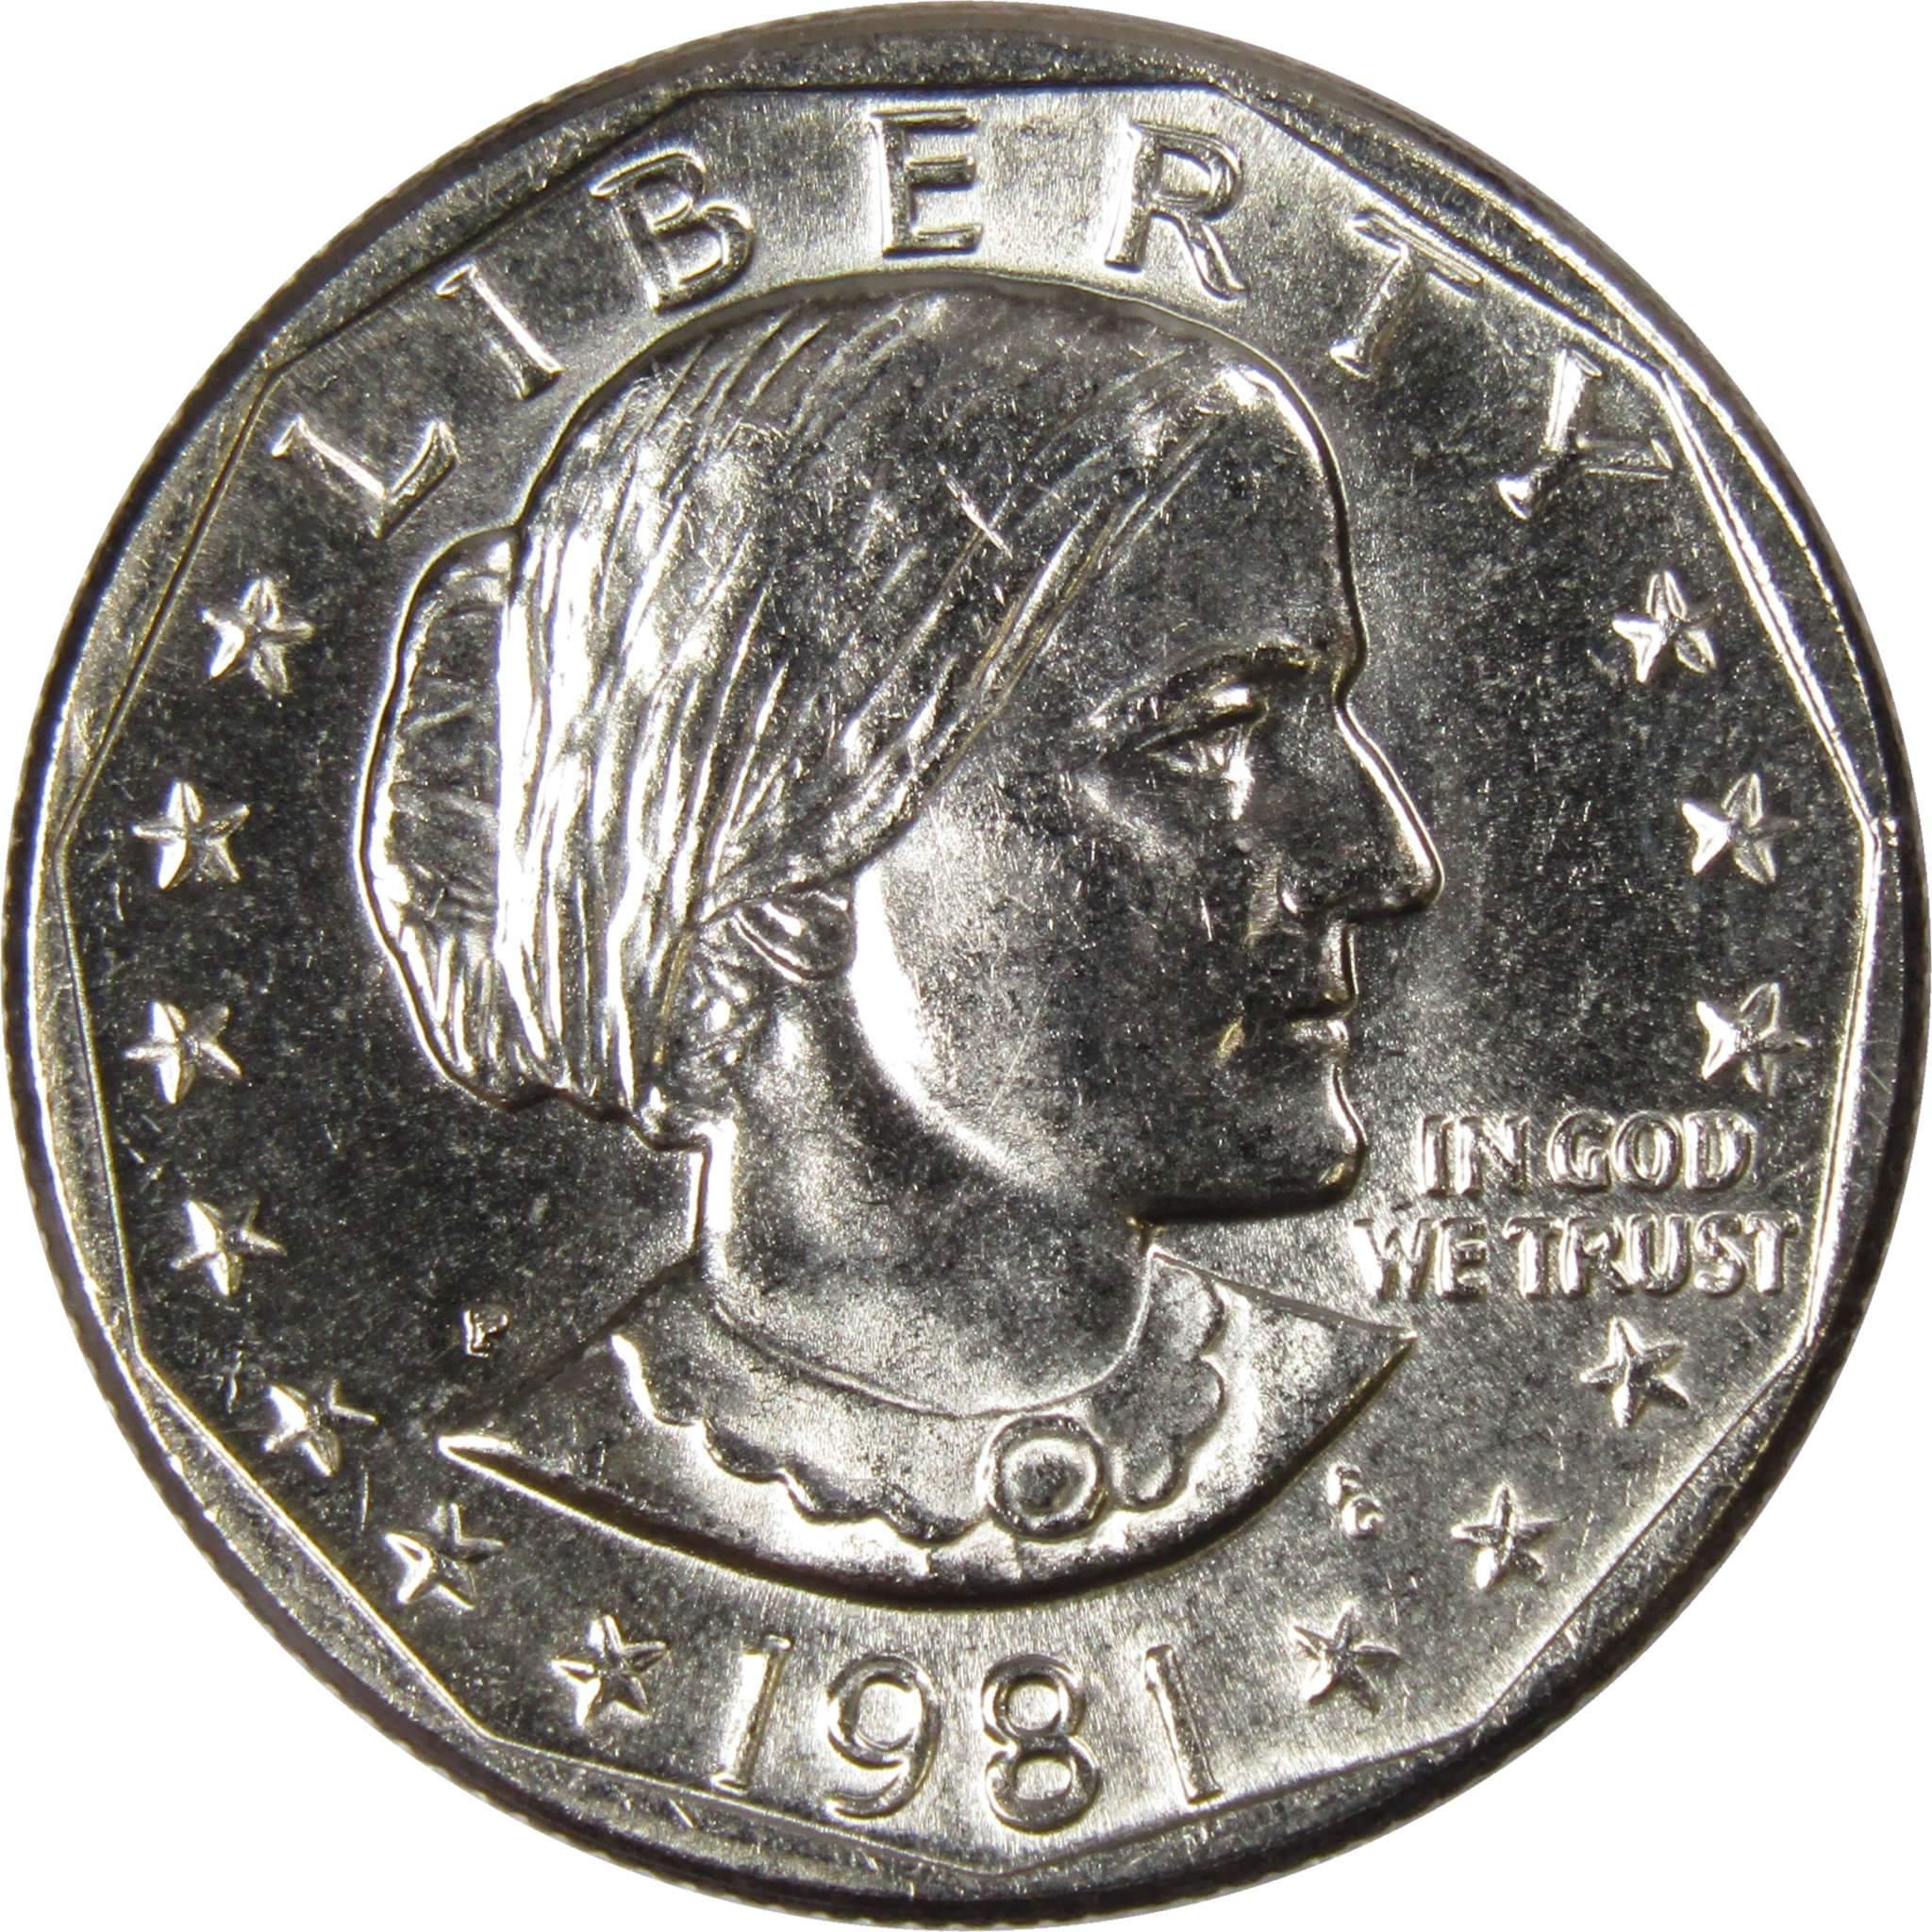 1981 P Susan B Anthony Dollar BU Uncirculated Mint State SBA $1 US Coin